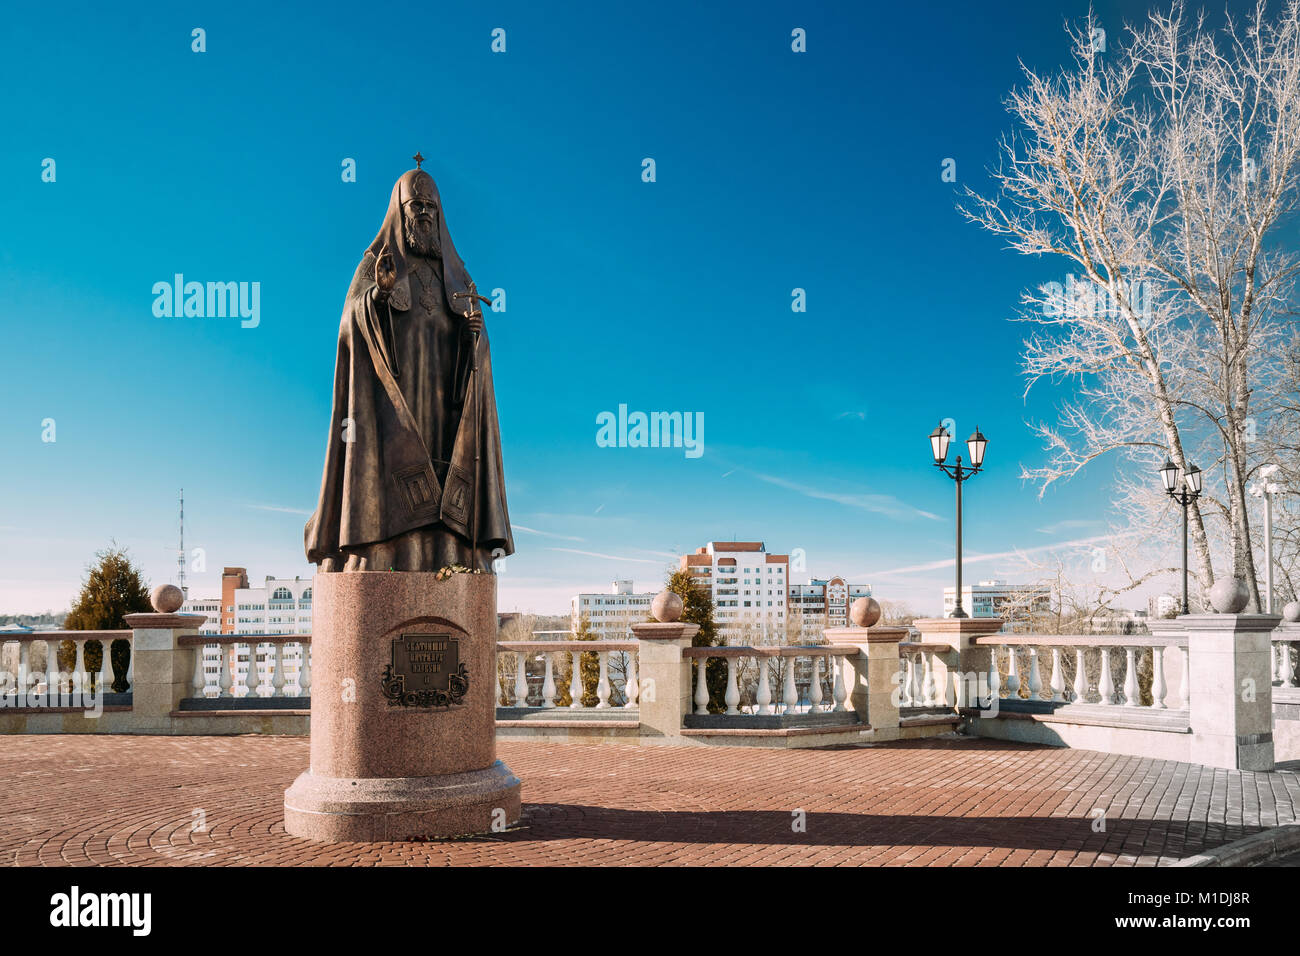 Vitebsk, Belarus. Monument To Patriarch Alexy II Or Alexius II Near Assumption Cathedral Church In Upper Town On Uspensky Hill In Winter Sunny Day. Stock Photo